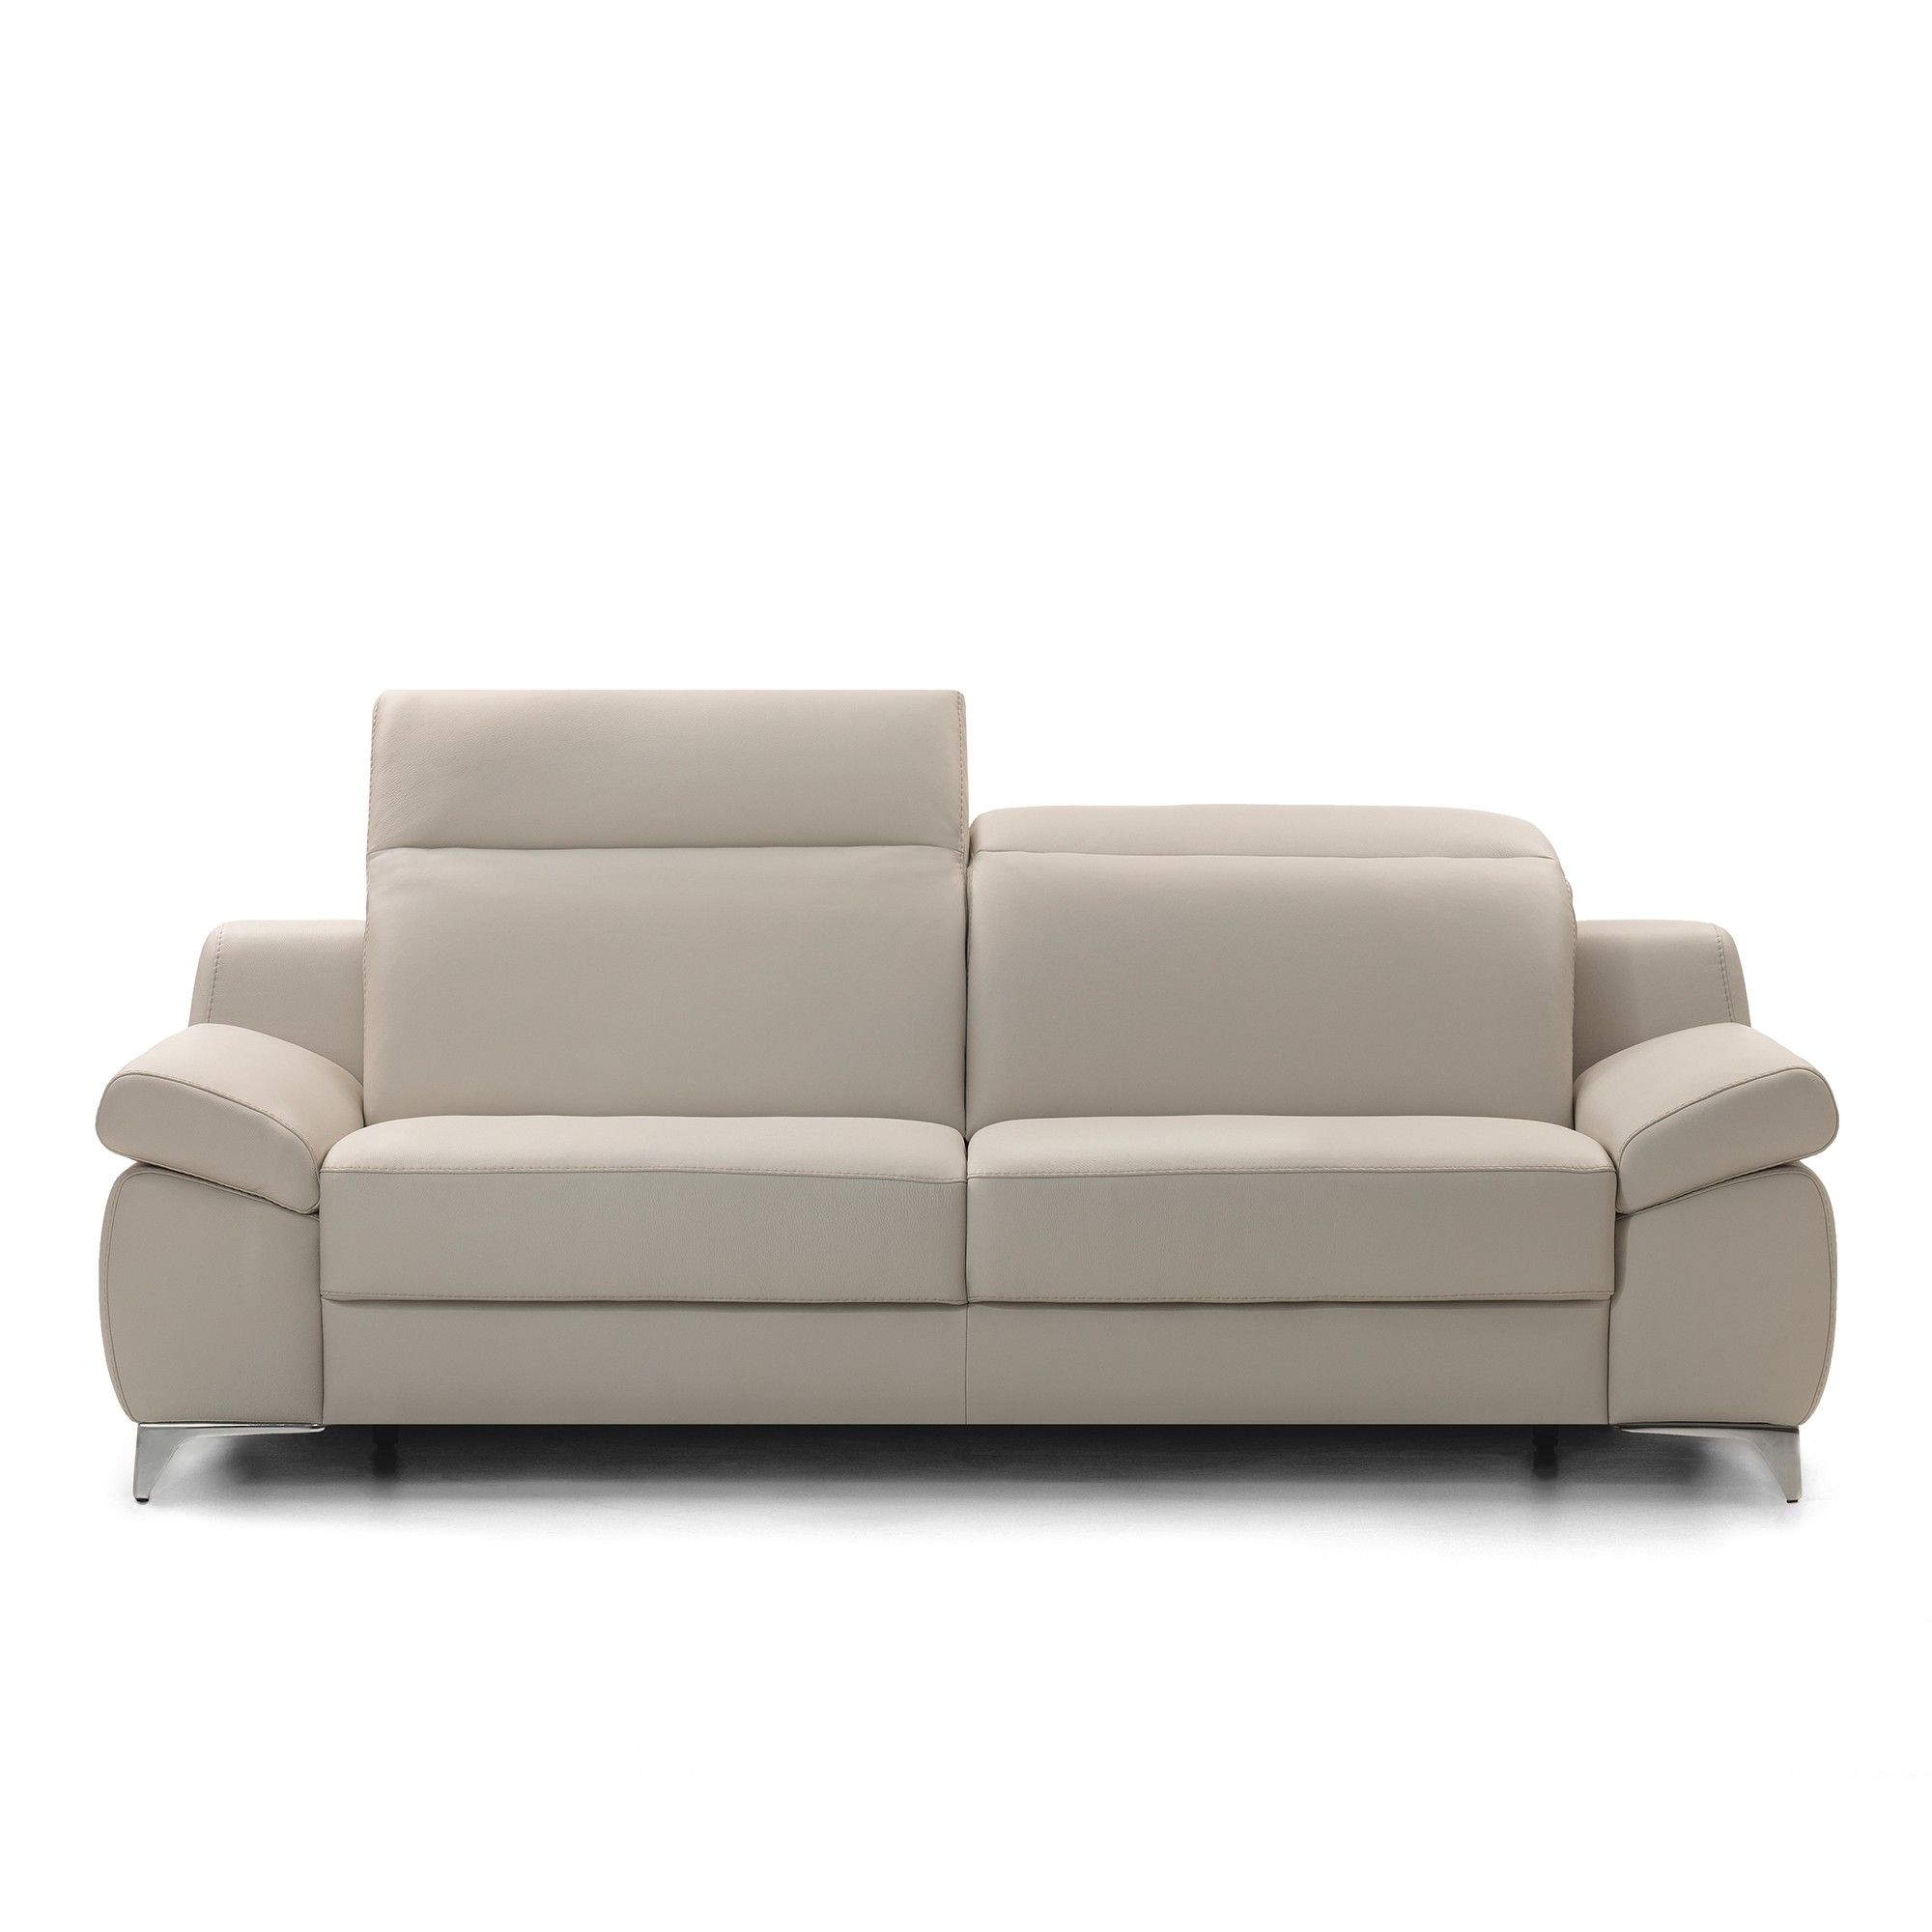 Rom Wren Power Recliner Sofa Large – Recliner Sofas – Cookes Furniture With Recliner Sofas (View 3 of 10)